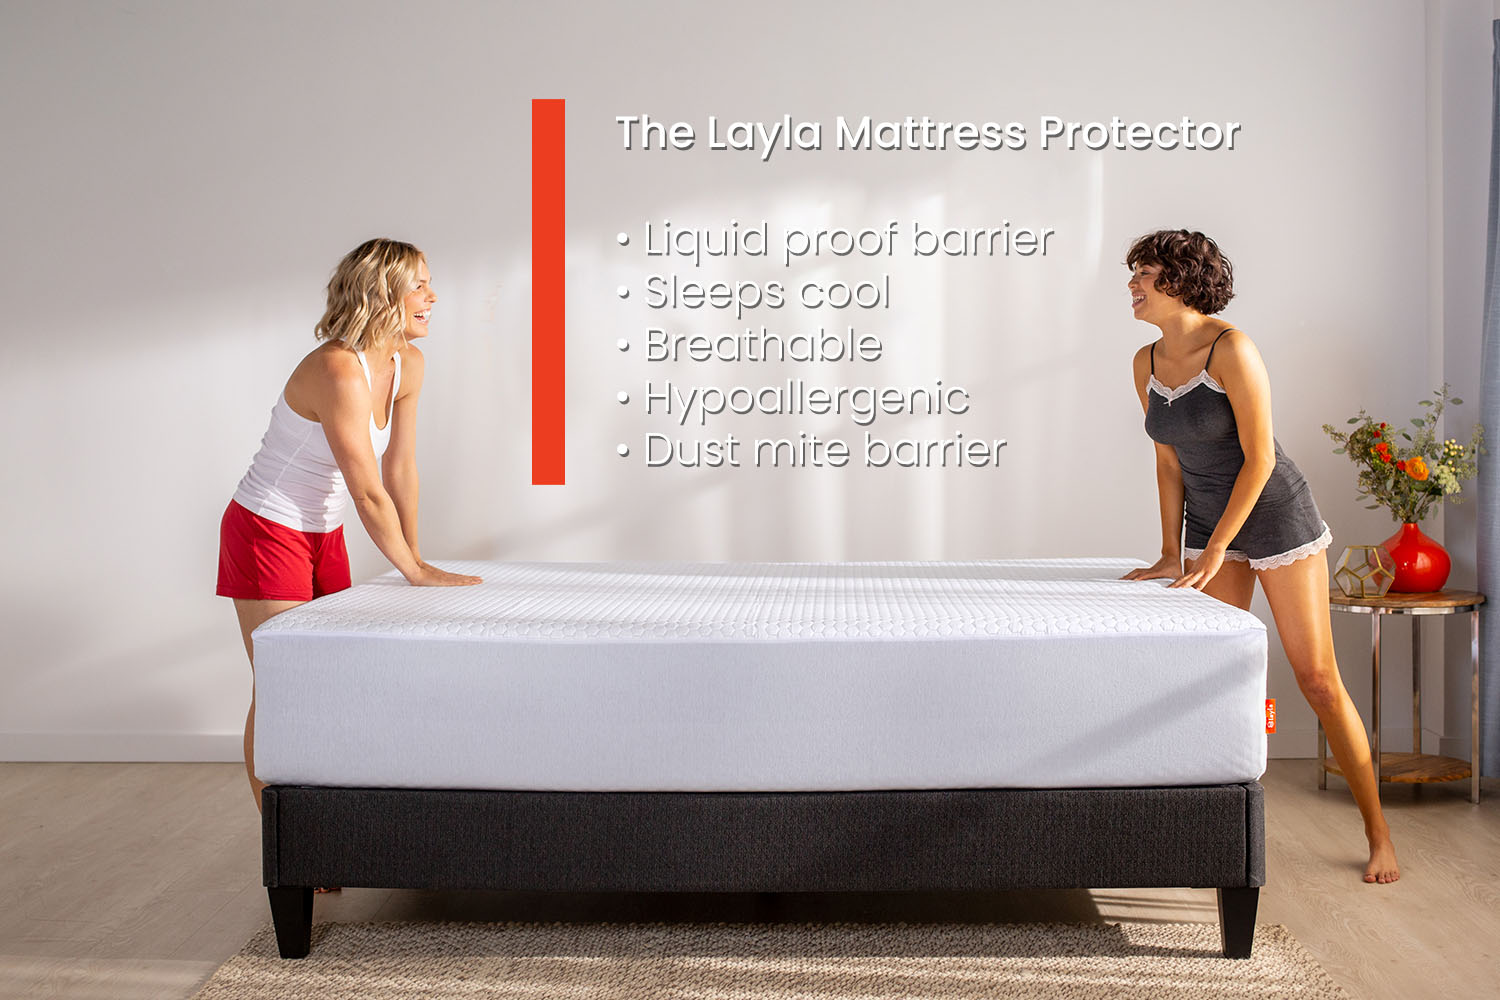 The Layla Mattress Protector